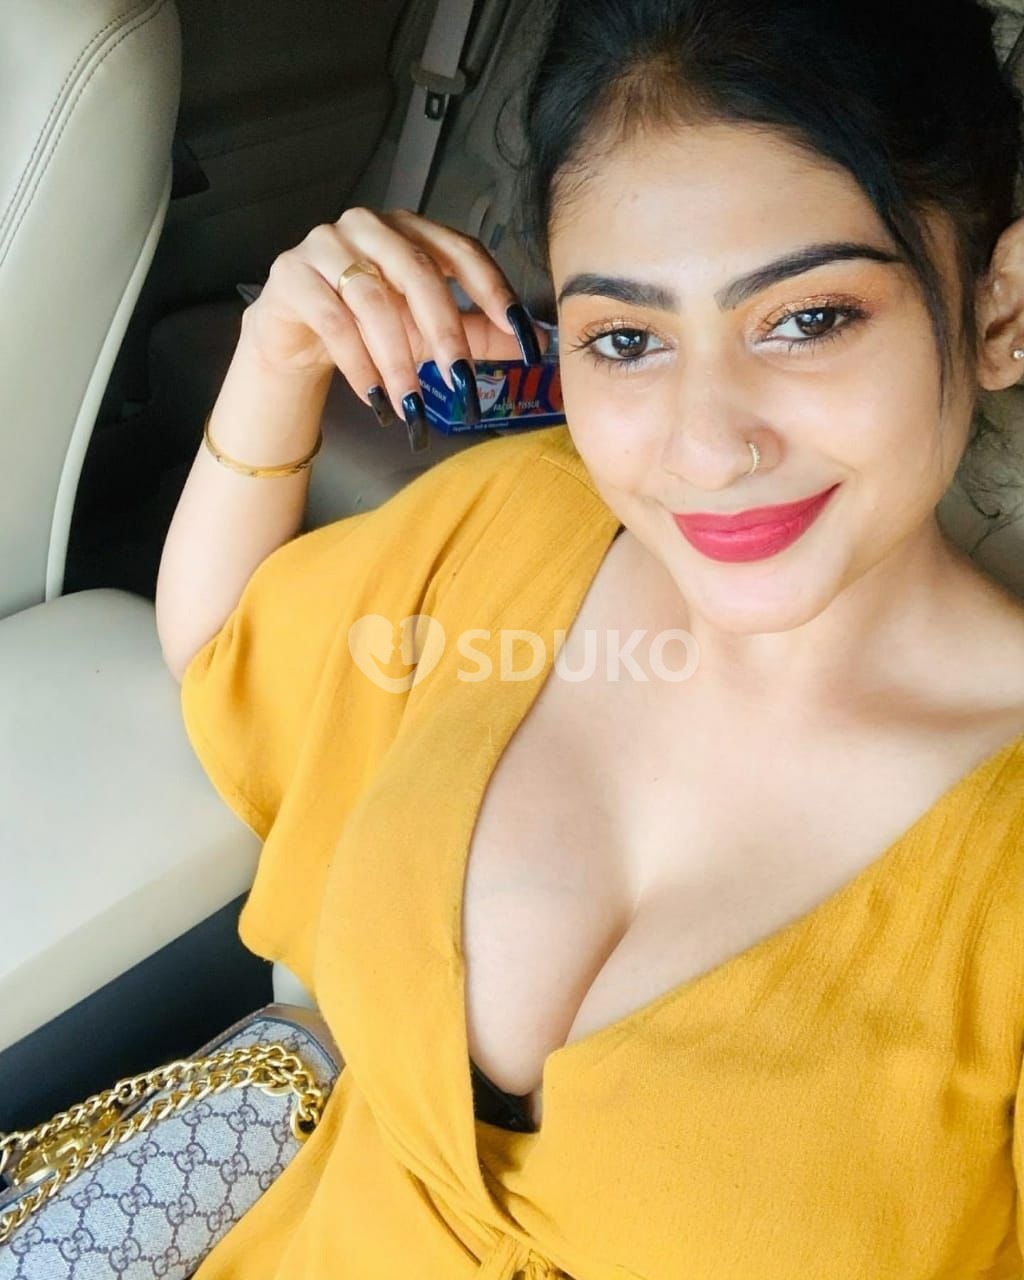 Shamshabad 92564/71656 now available call girl service full safe and secure without condom sucking kissing all services 